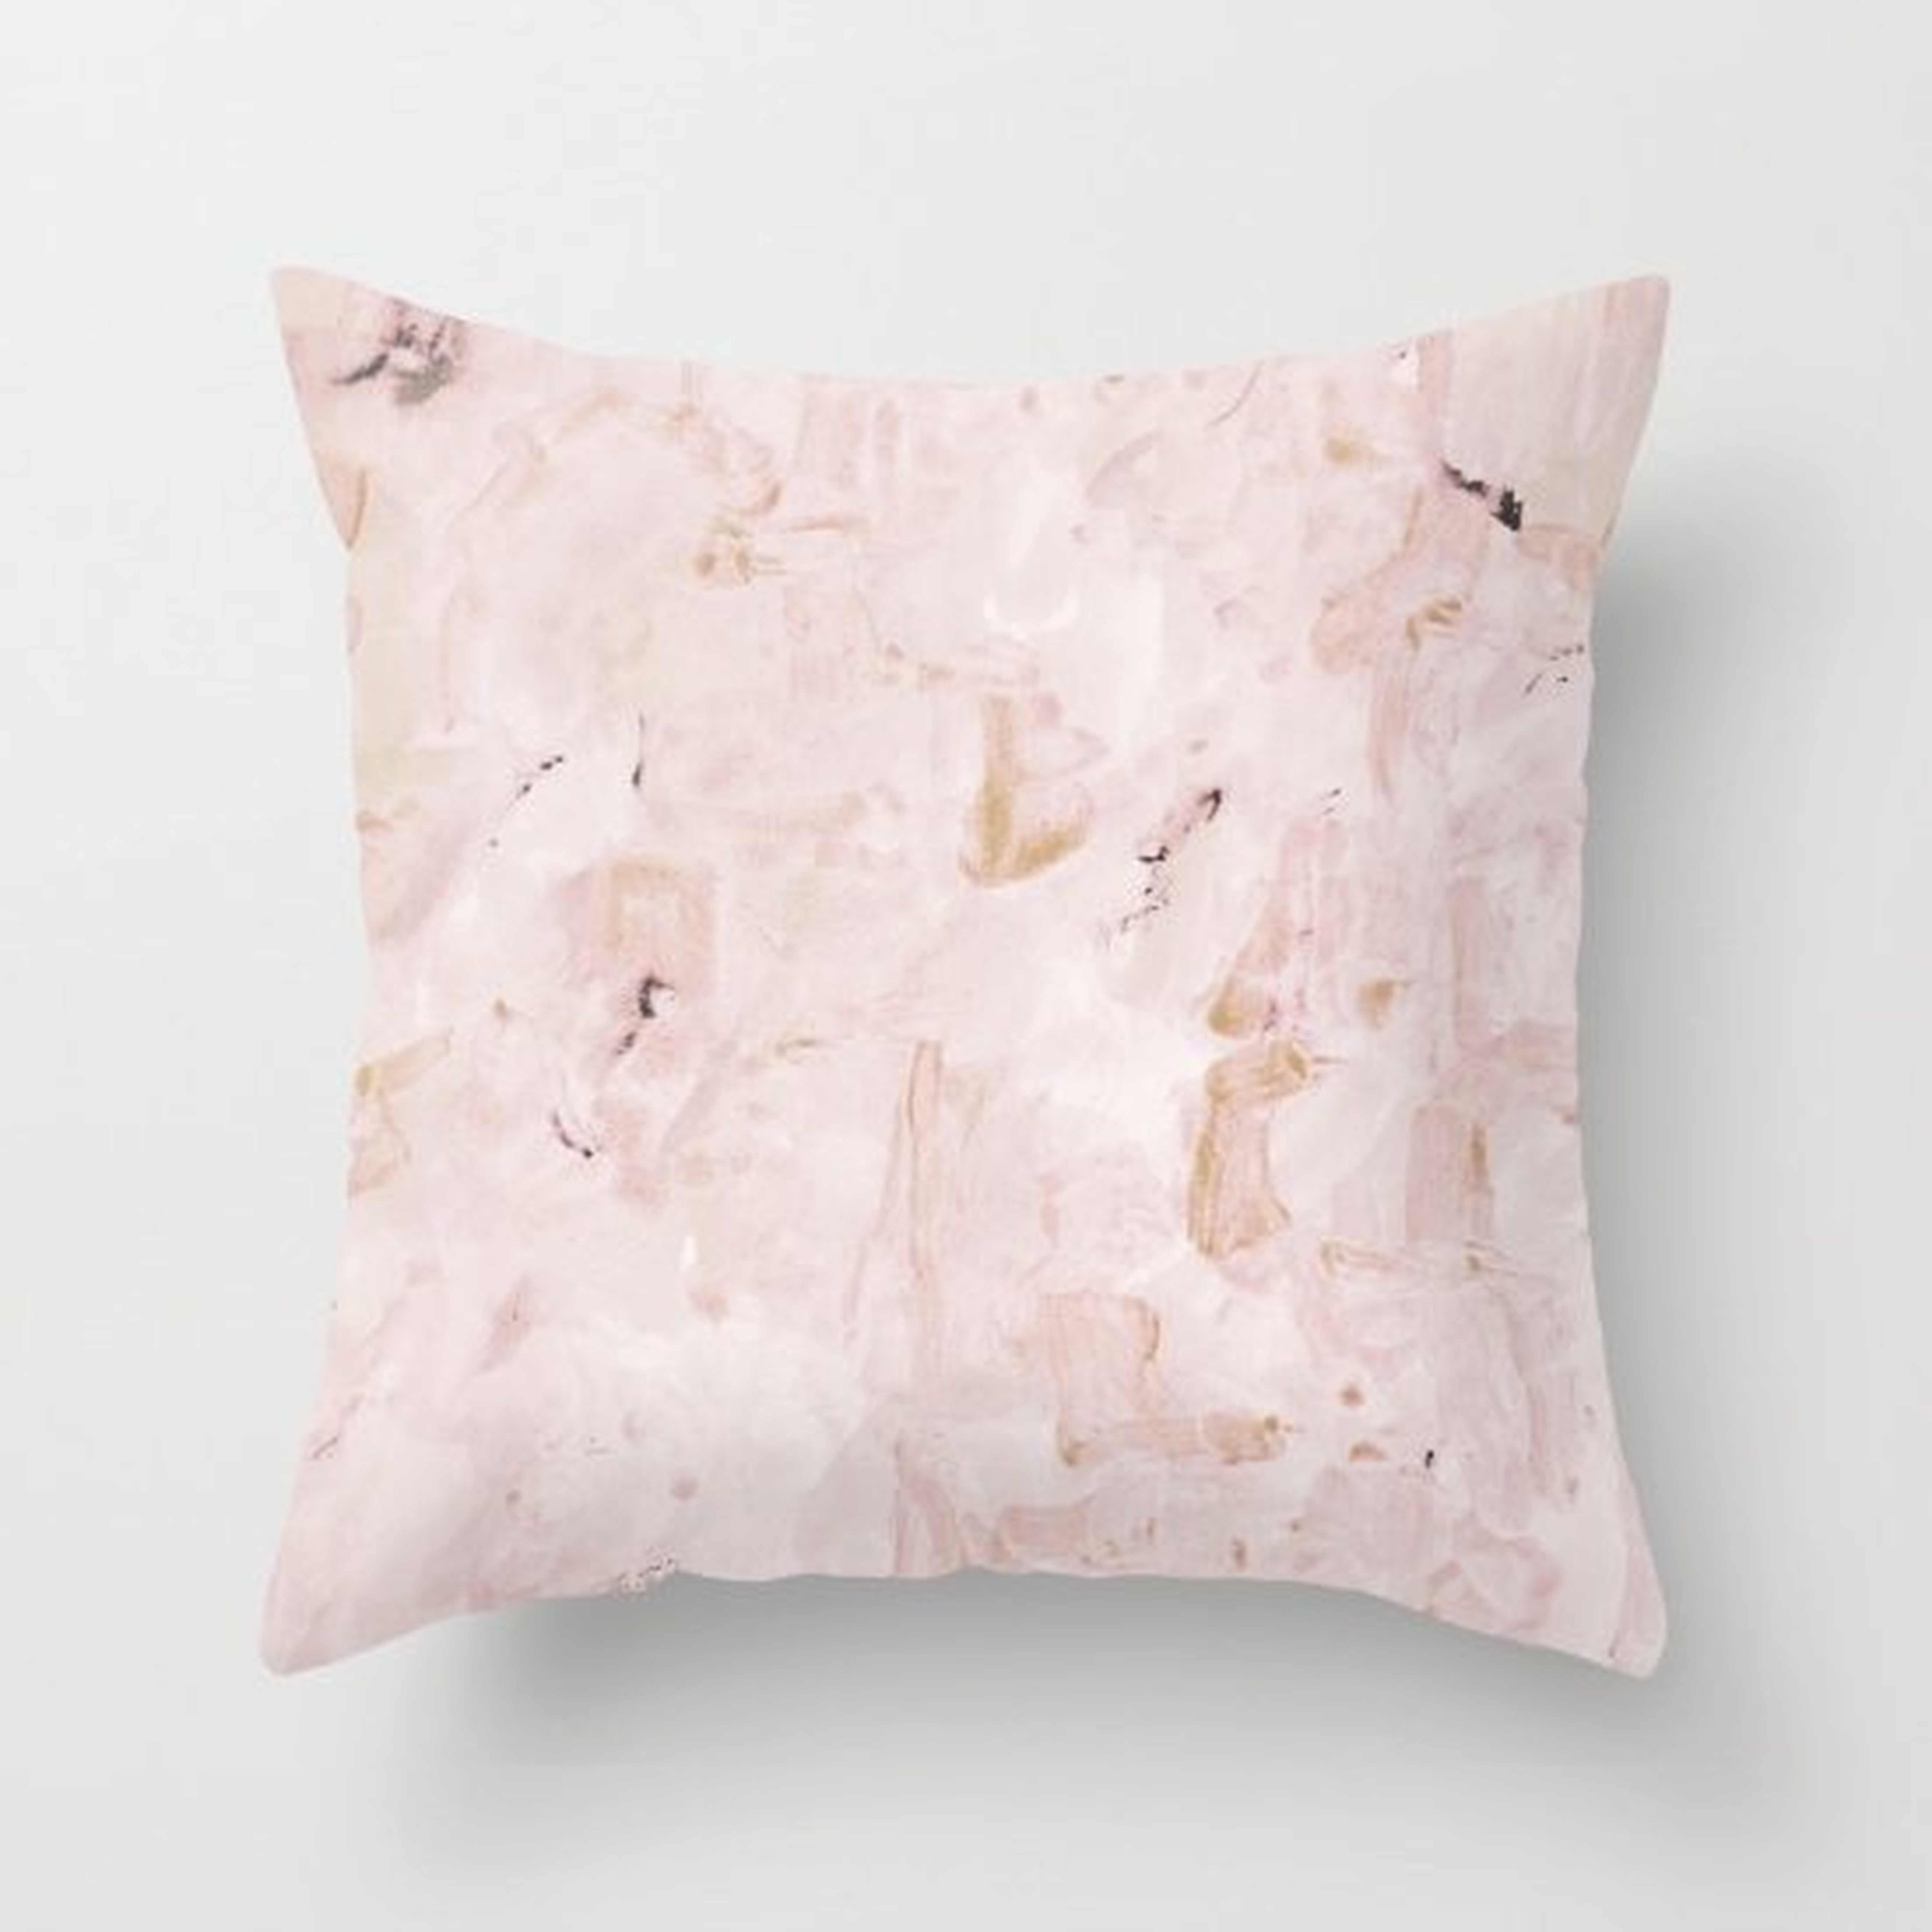 abstract-soft pink Pillow - 18" x 18" with Insert - Society6